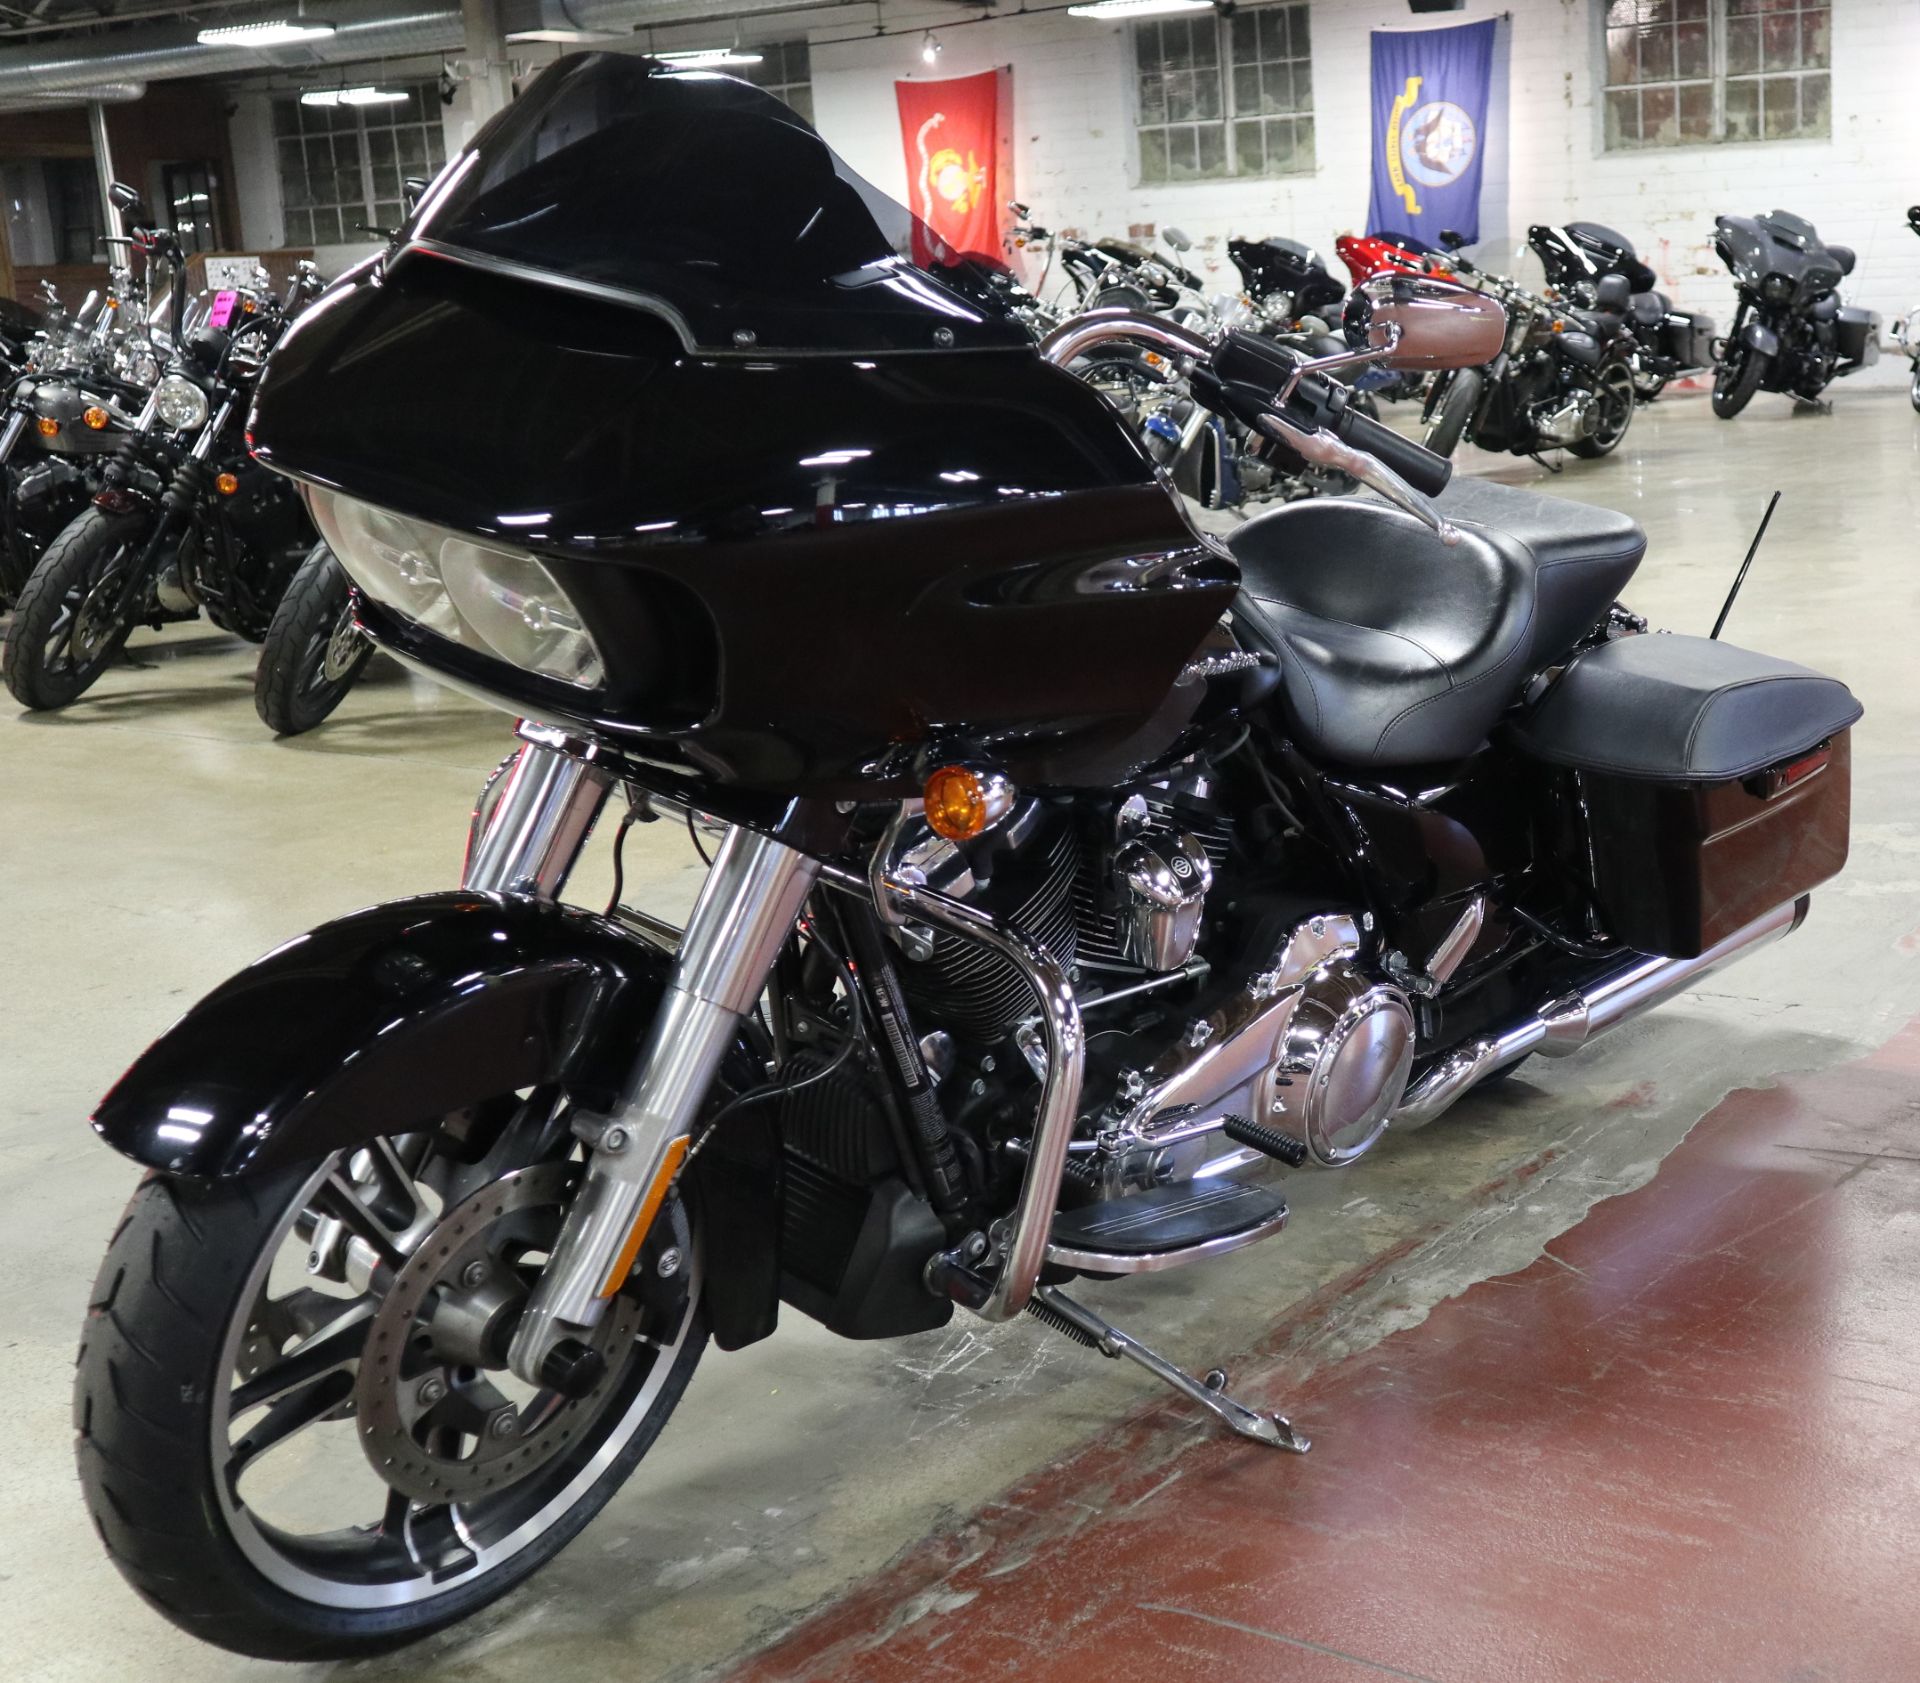 2017 Harley-Davidson Road Glide® Special in New London, Connecticut - Photo 4